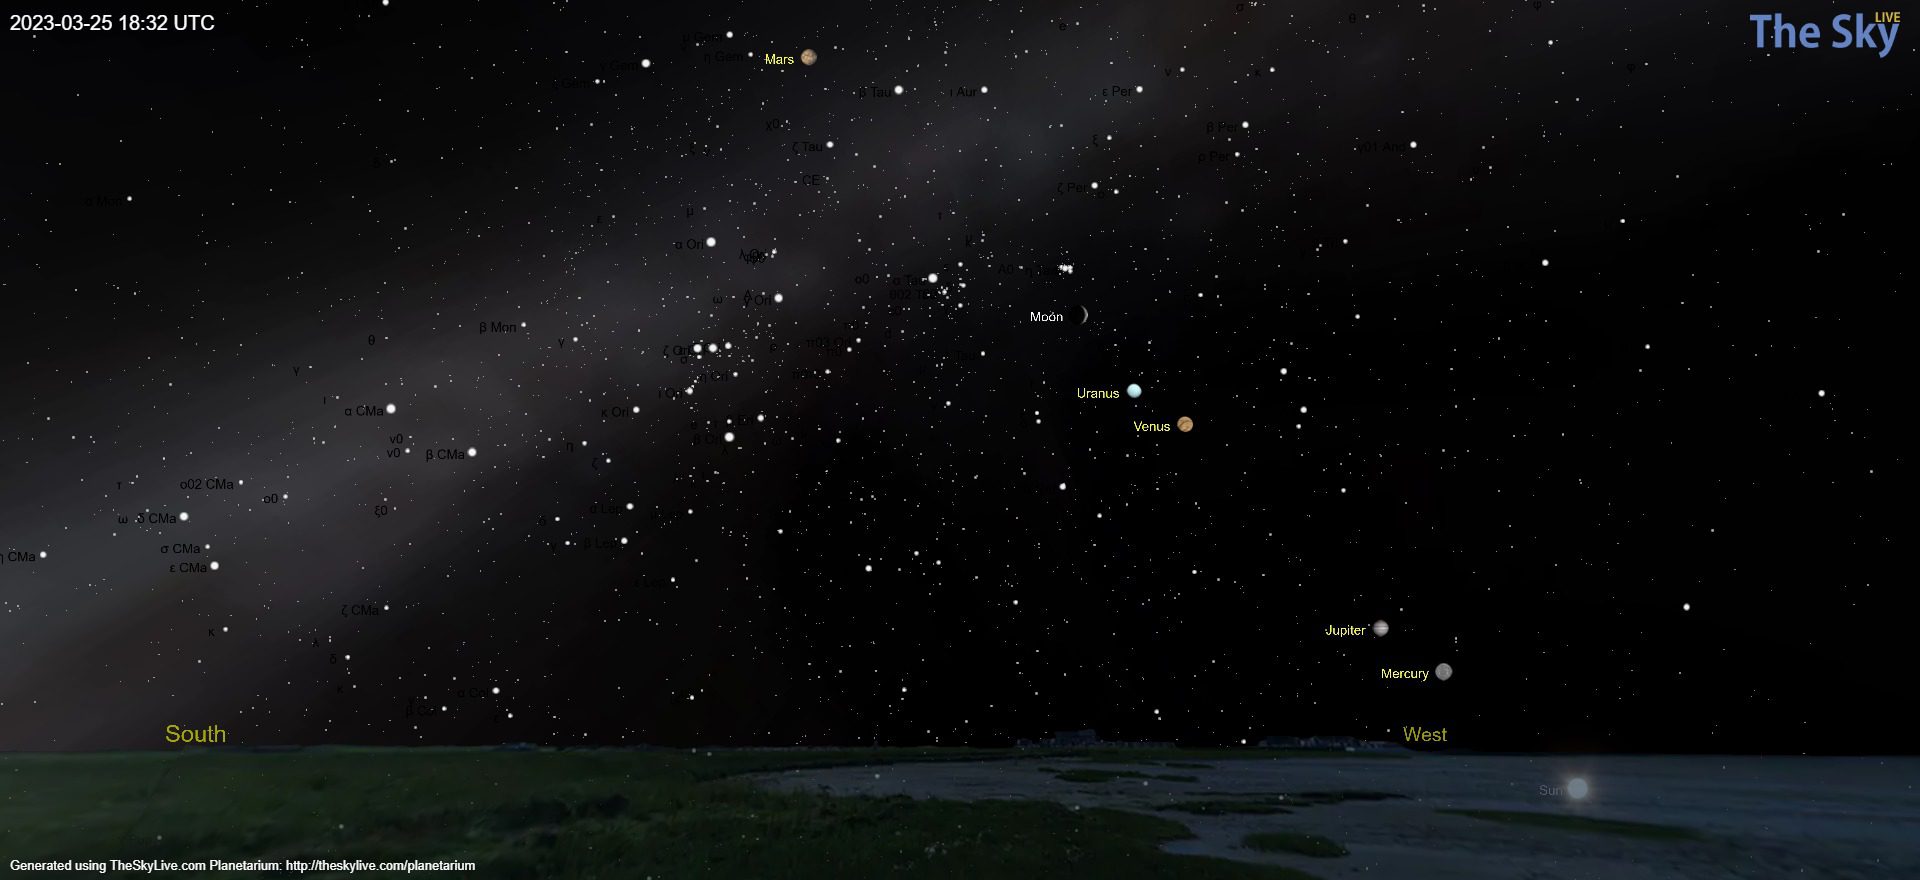 An illustration of the sky on March 25 showing the relative positions of planets